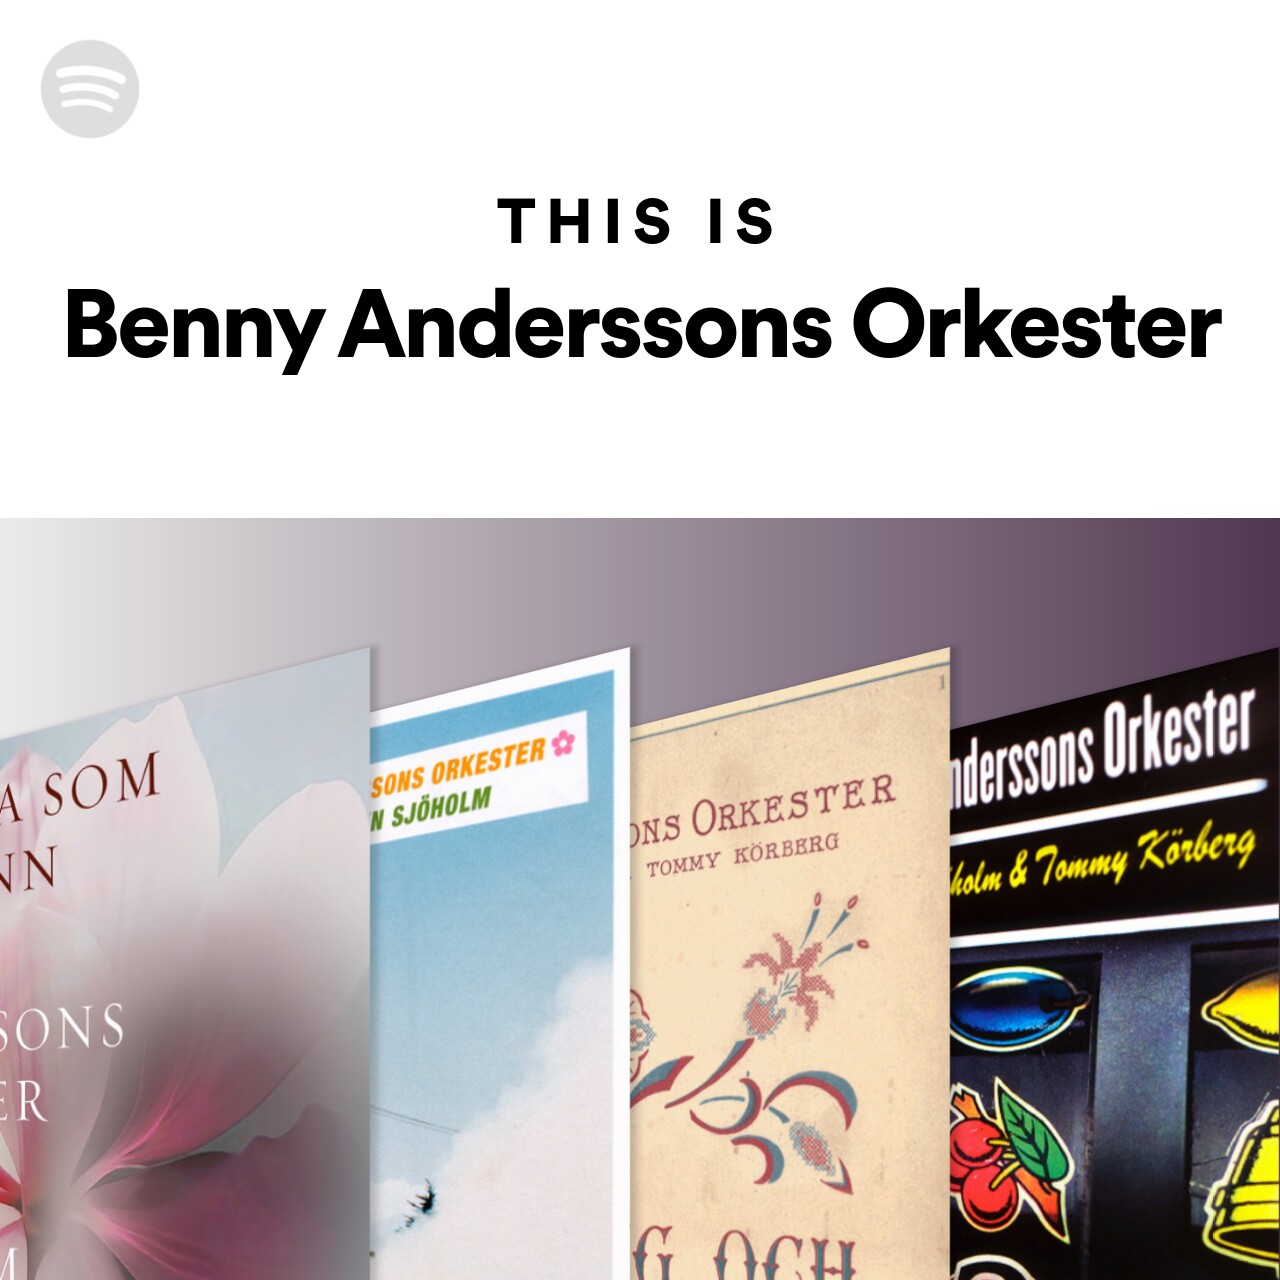 This Is Benny Anderssons Orkester